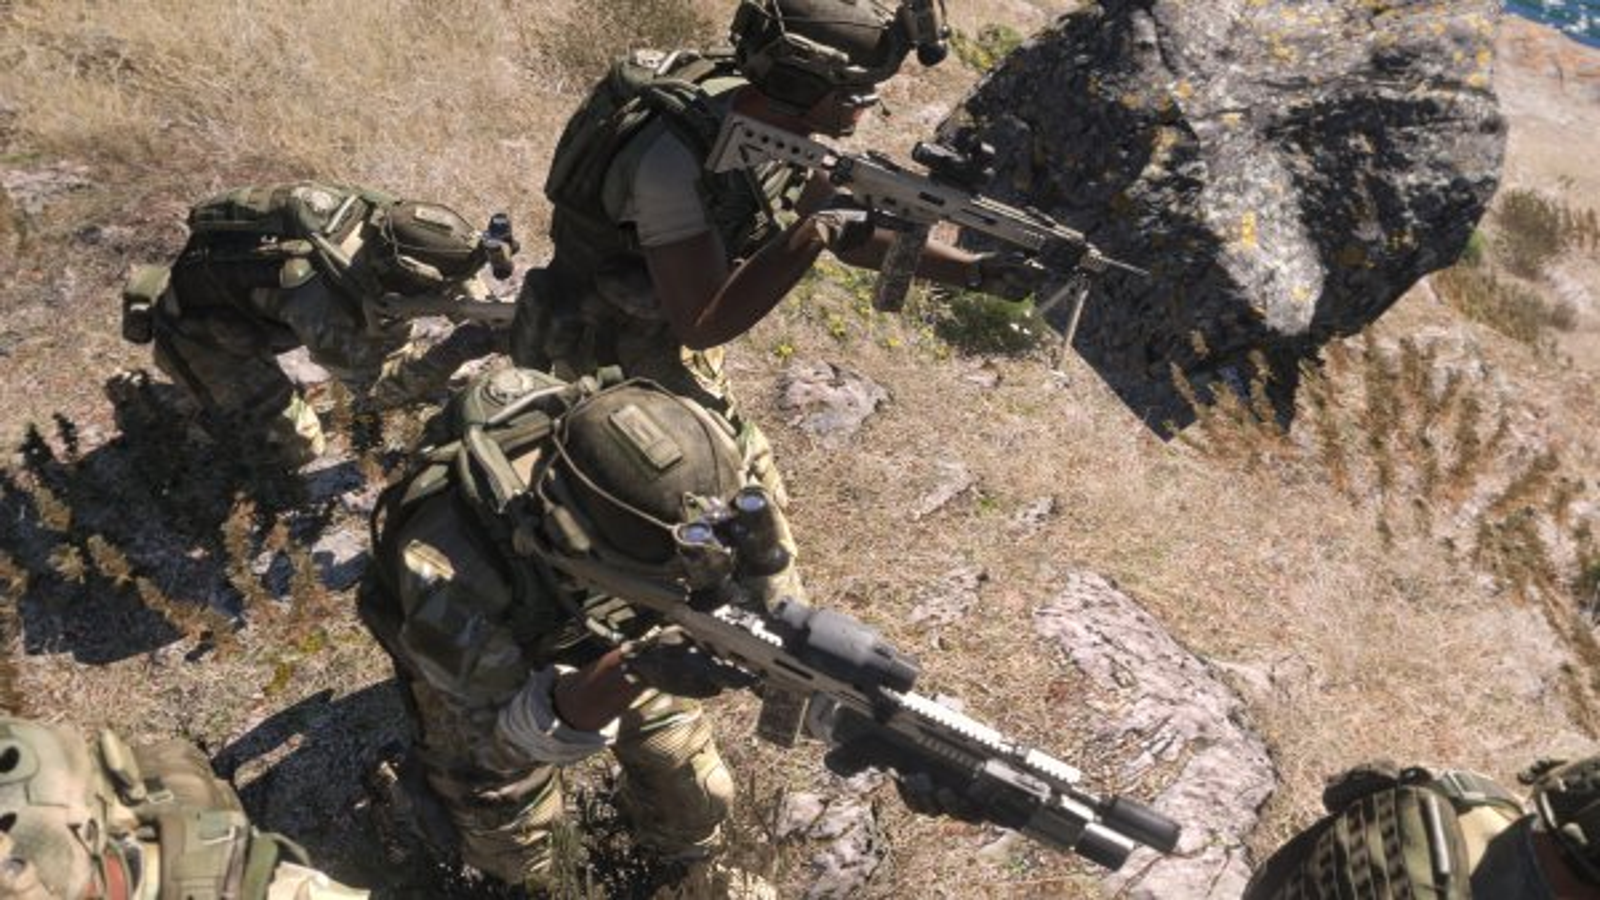 Arma Reforger multiplayer is a new kind of challenge